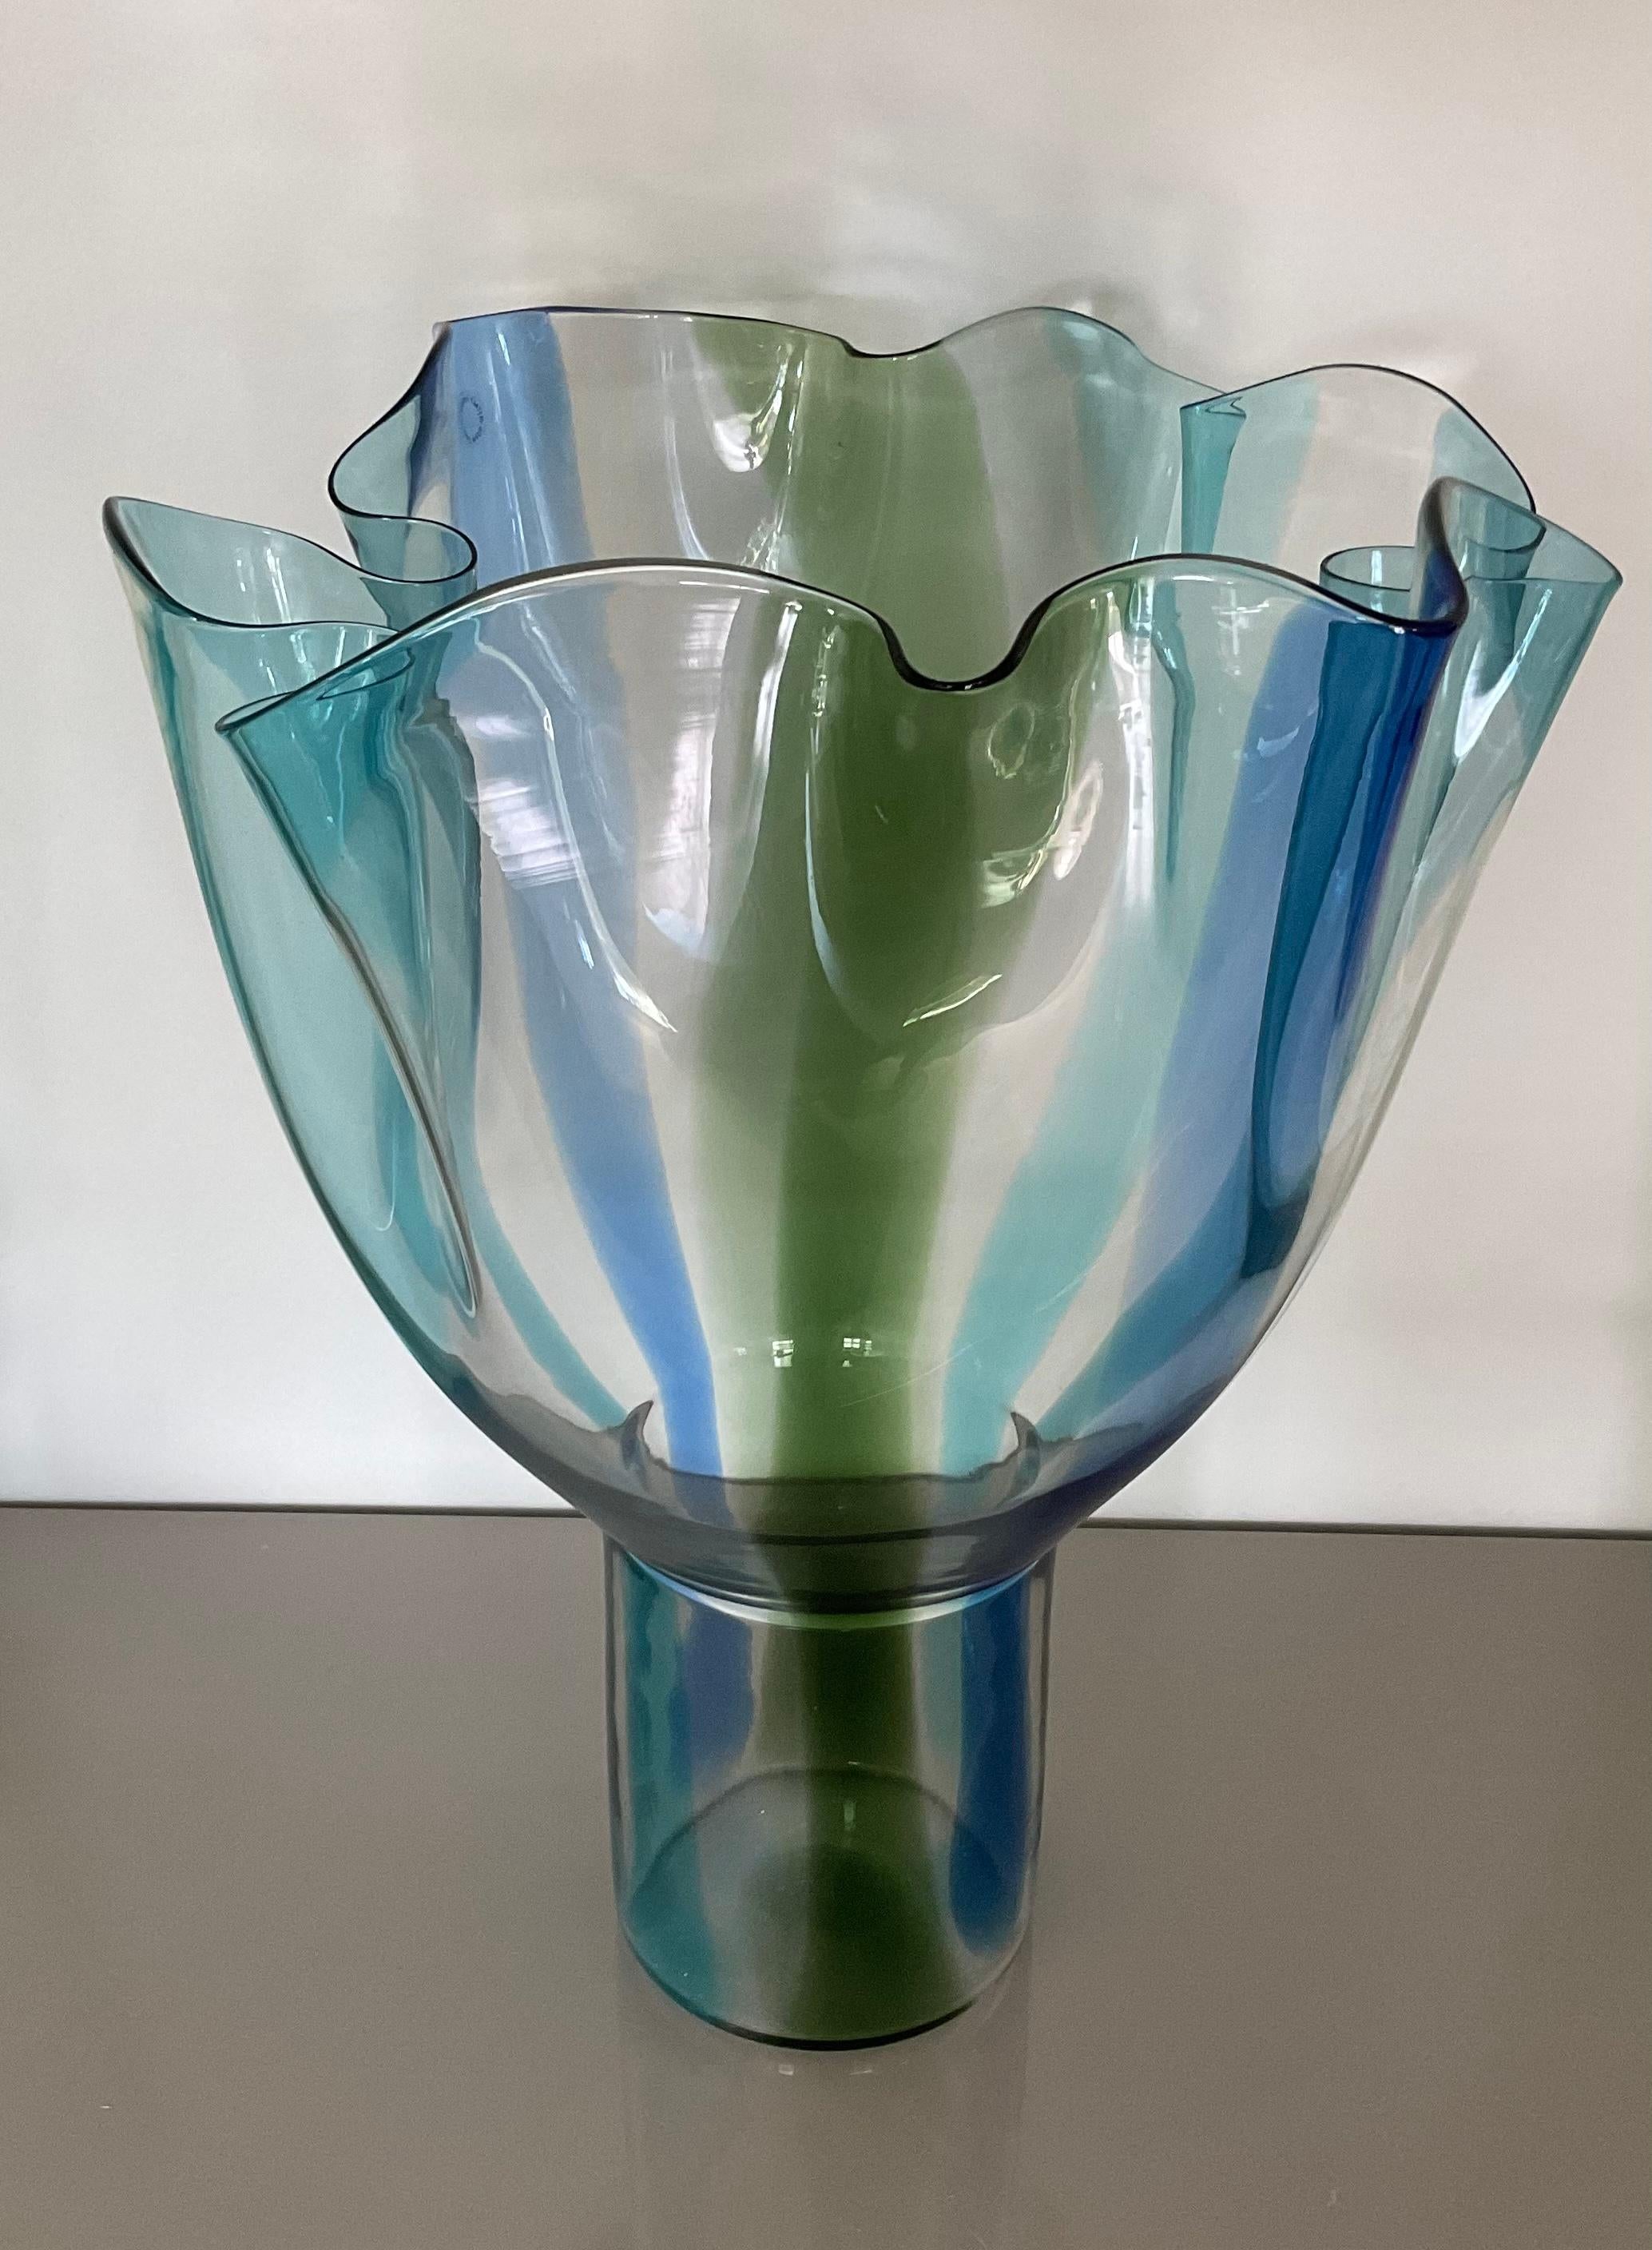 Large Size Timo Sarpeneva for Venini Kukinto vase. Signed and dated 1995 on the bottom. Also retains its original Venini label.